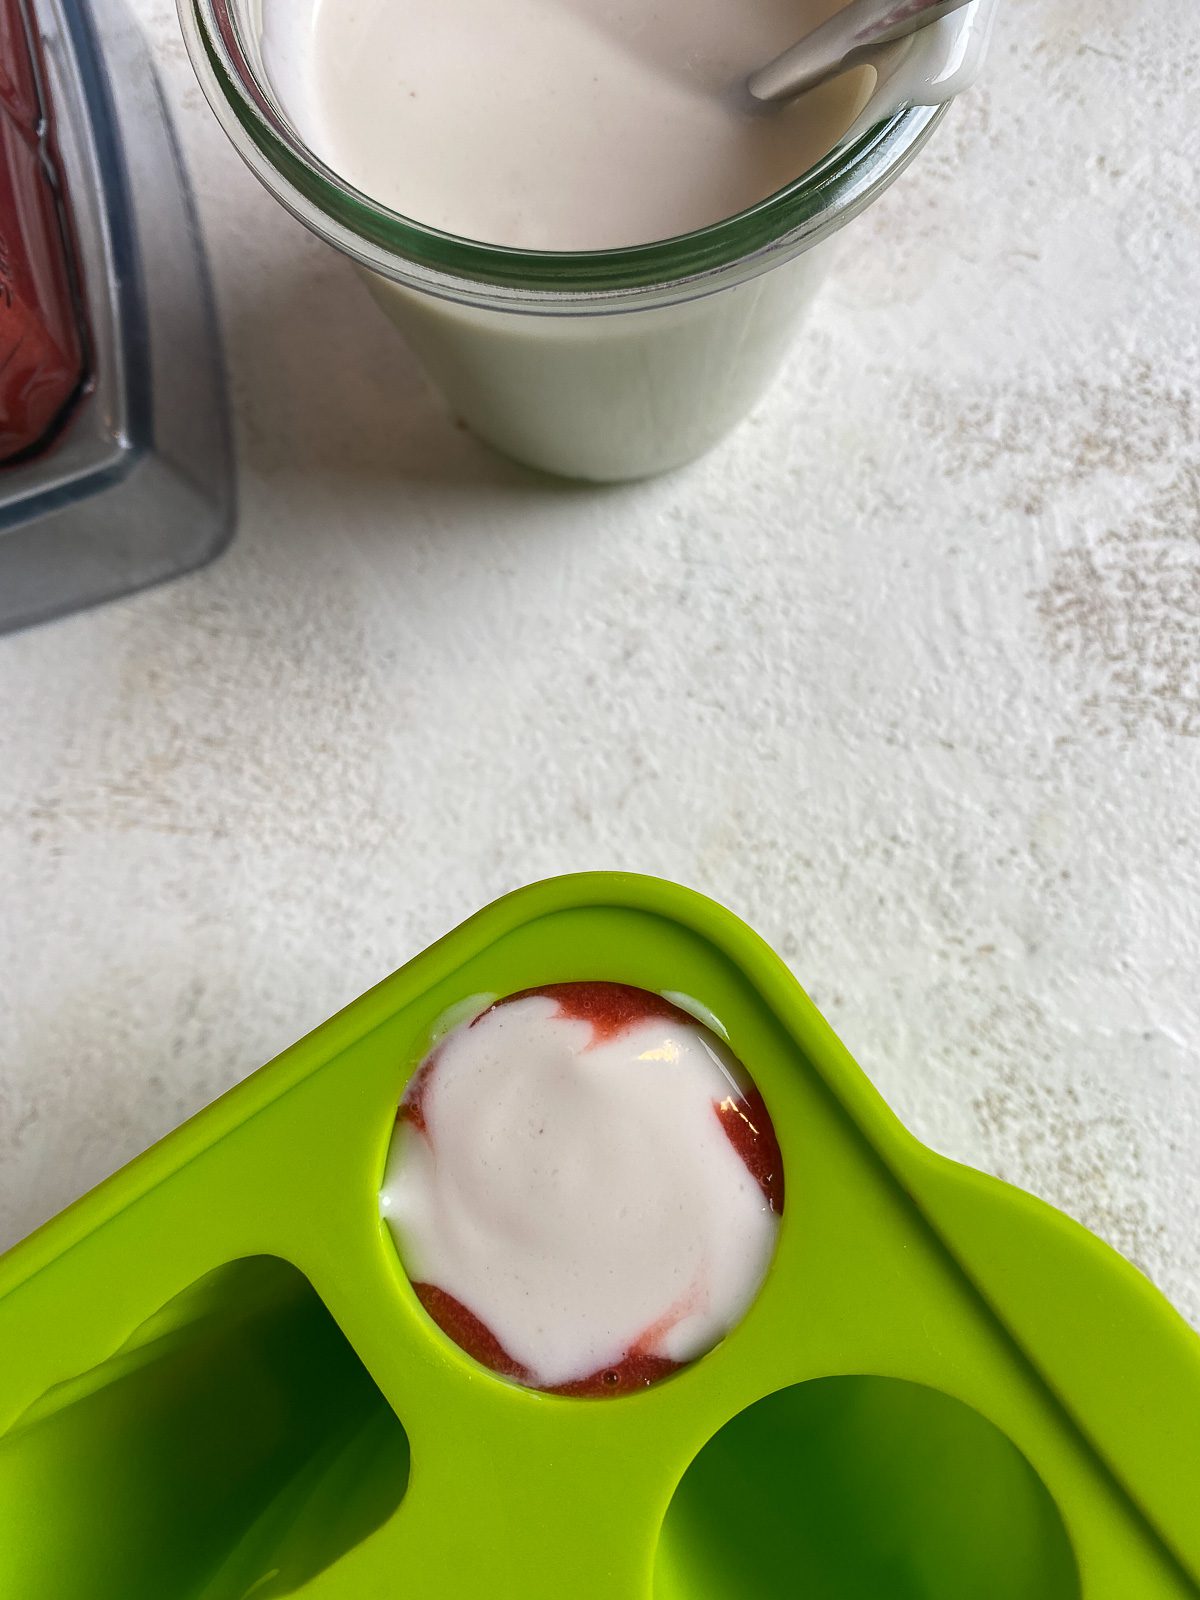 strawberry mixture and vegan yogurt in a popsicle mold against a white surface